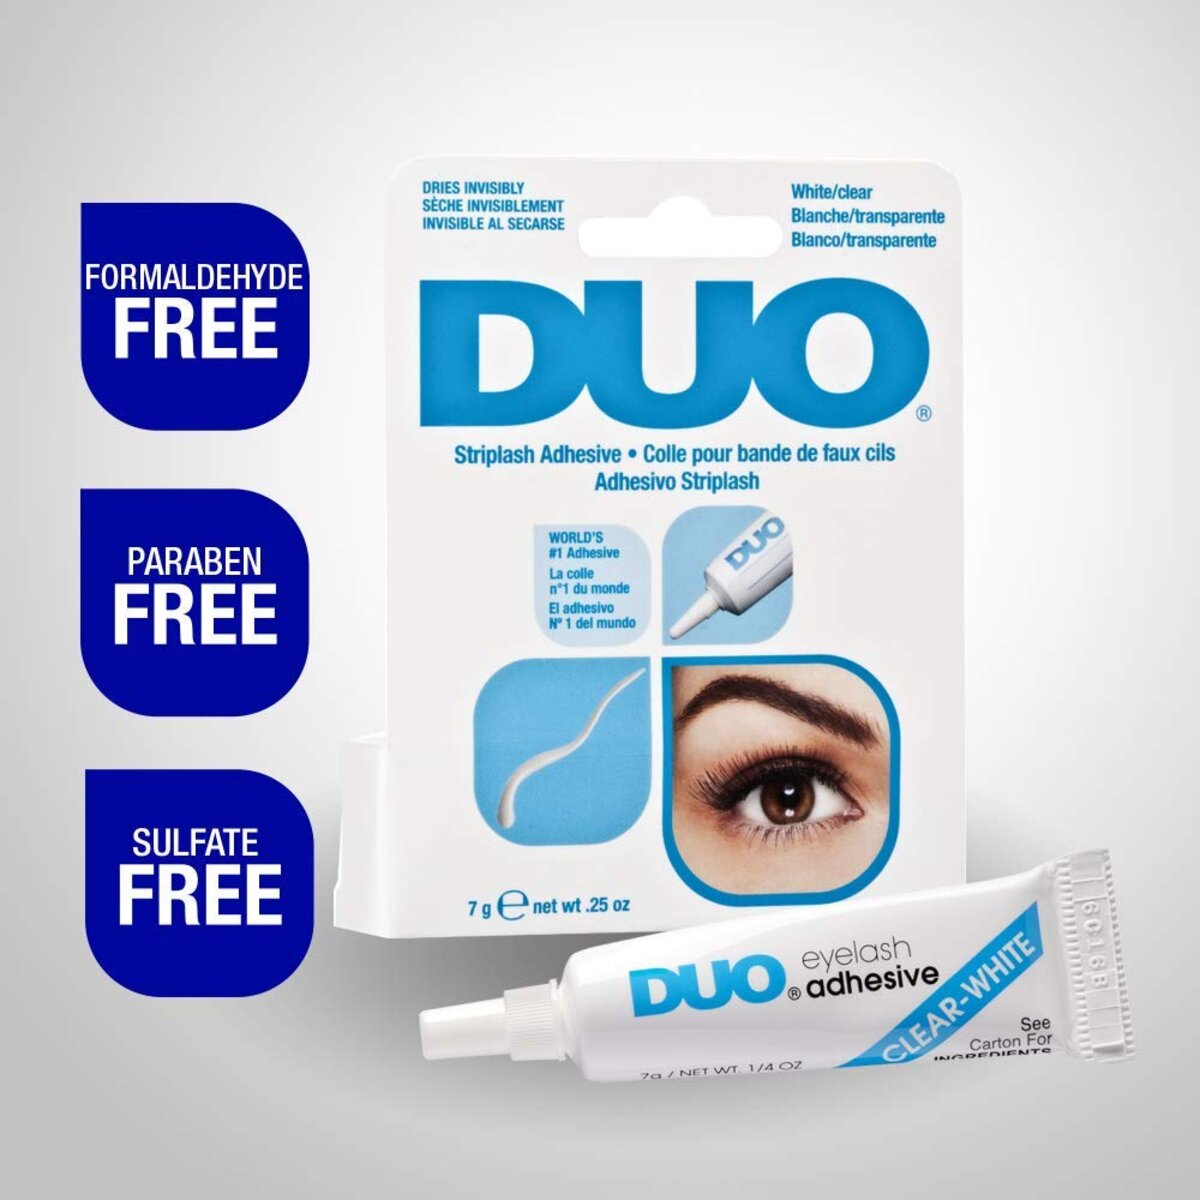 DUO LASH ADHESIVE CLEAR - ARDELL